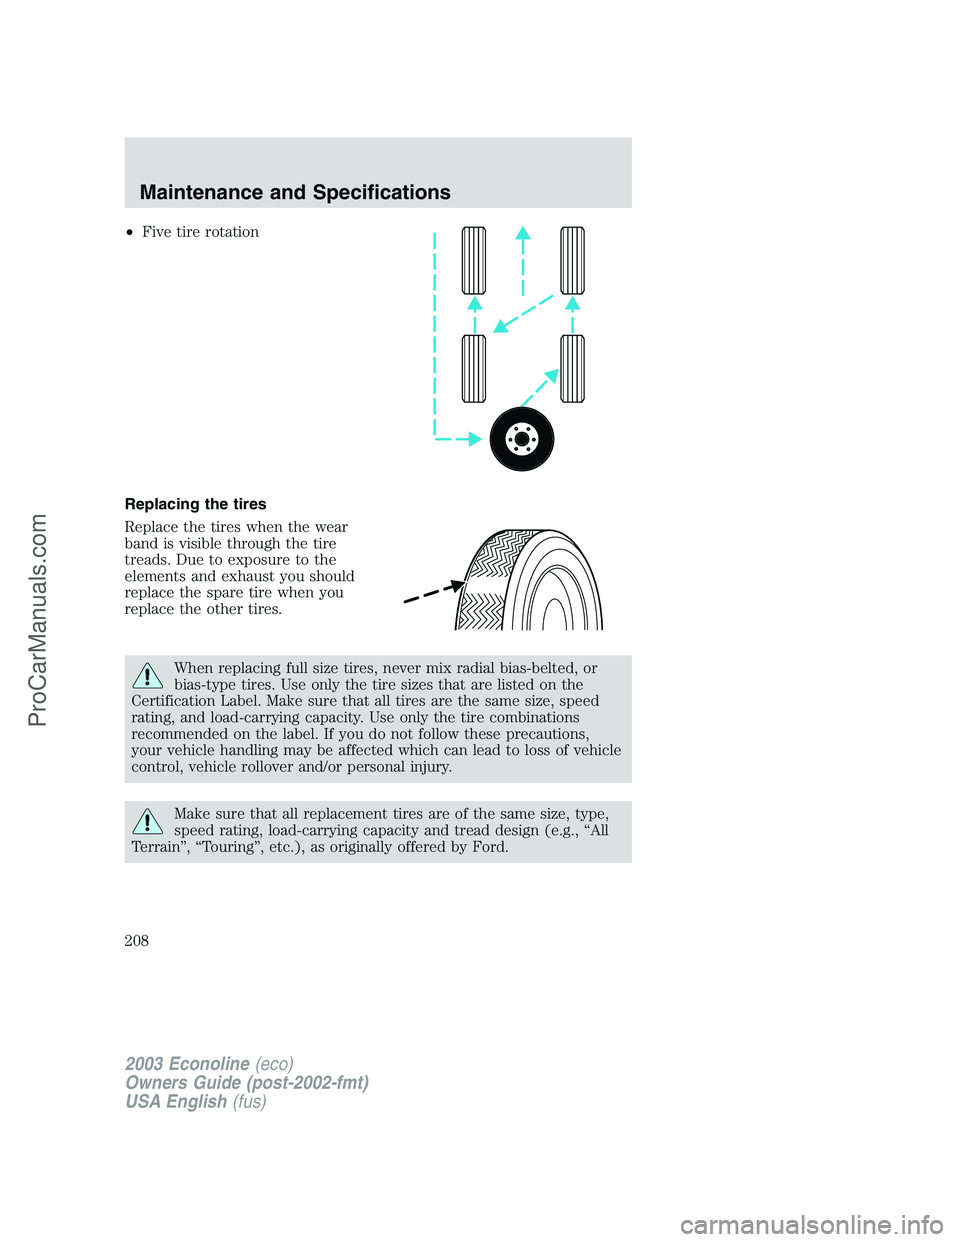 FORD E-450 2003  Owners Manual •Five tire rotation
Replacing the tires
Replace the tires when the wear
band is visible through the tire
treads. Due to exposure to the
elements and exhaust you should
replace the spare tire when yo